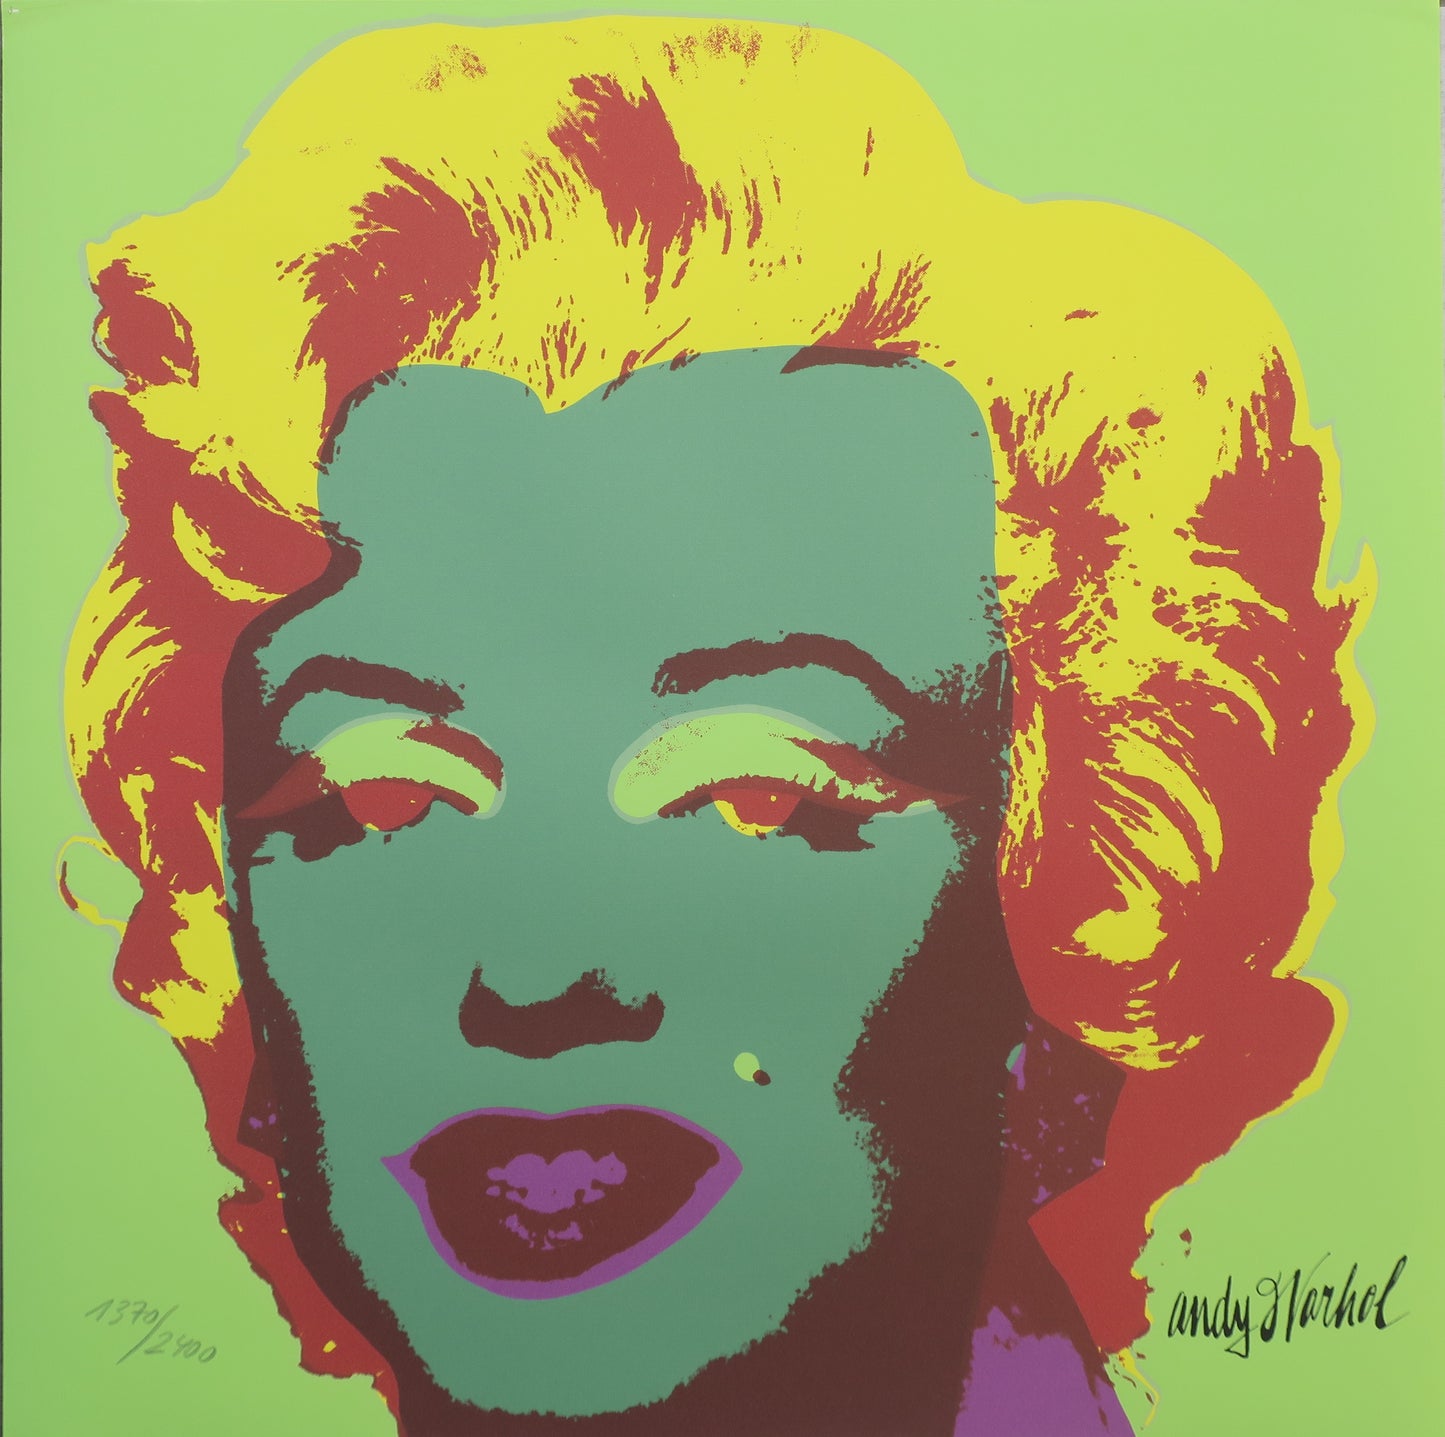 Andy Warhol Marilyn Monroe Lithograph reduced